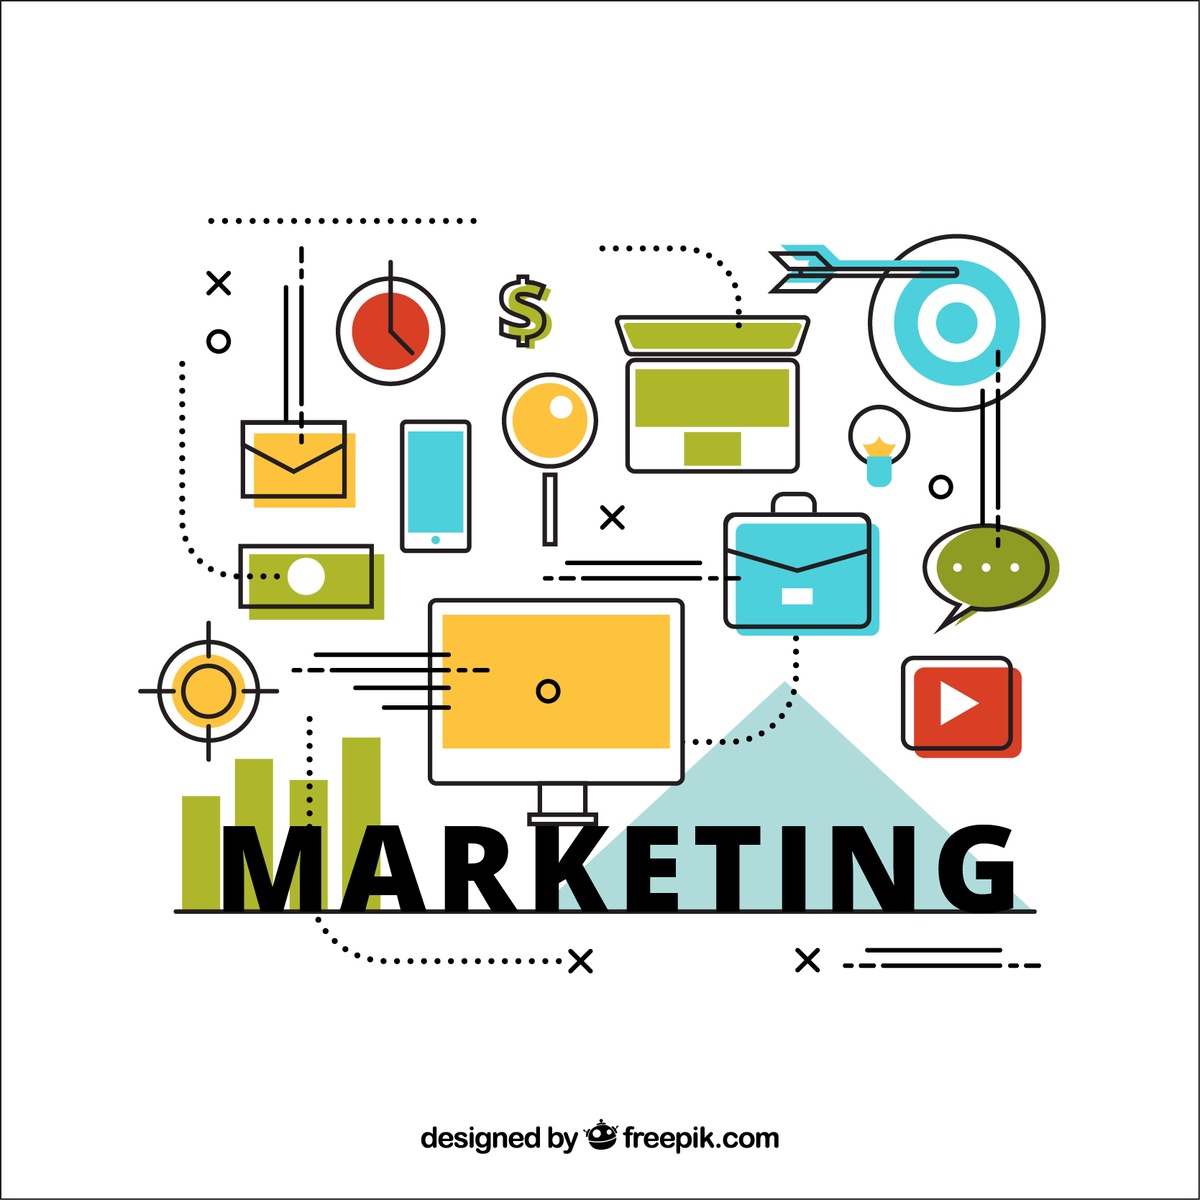 Learn Digital Marketing the Practical Way at Career Fortune